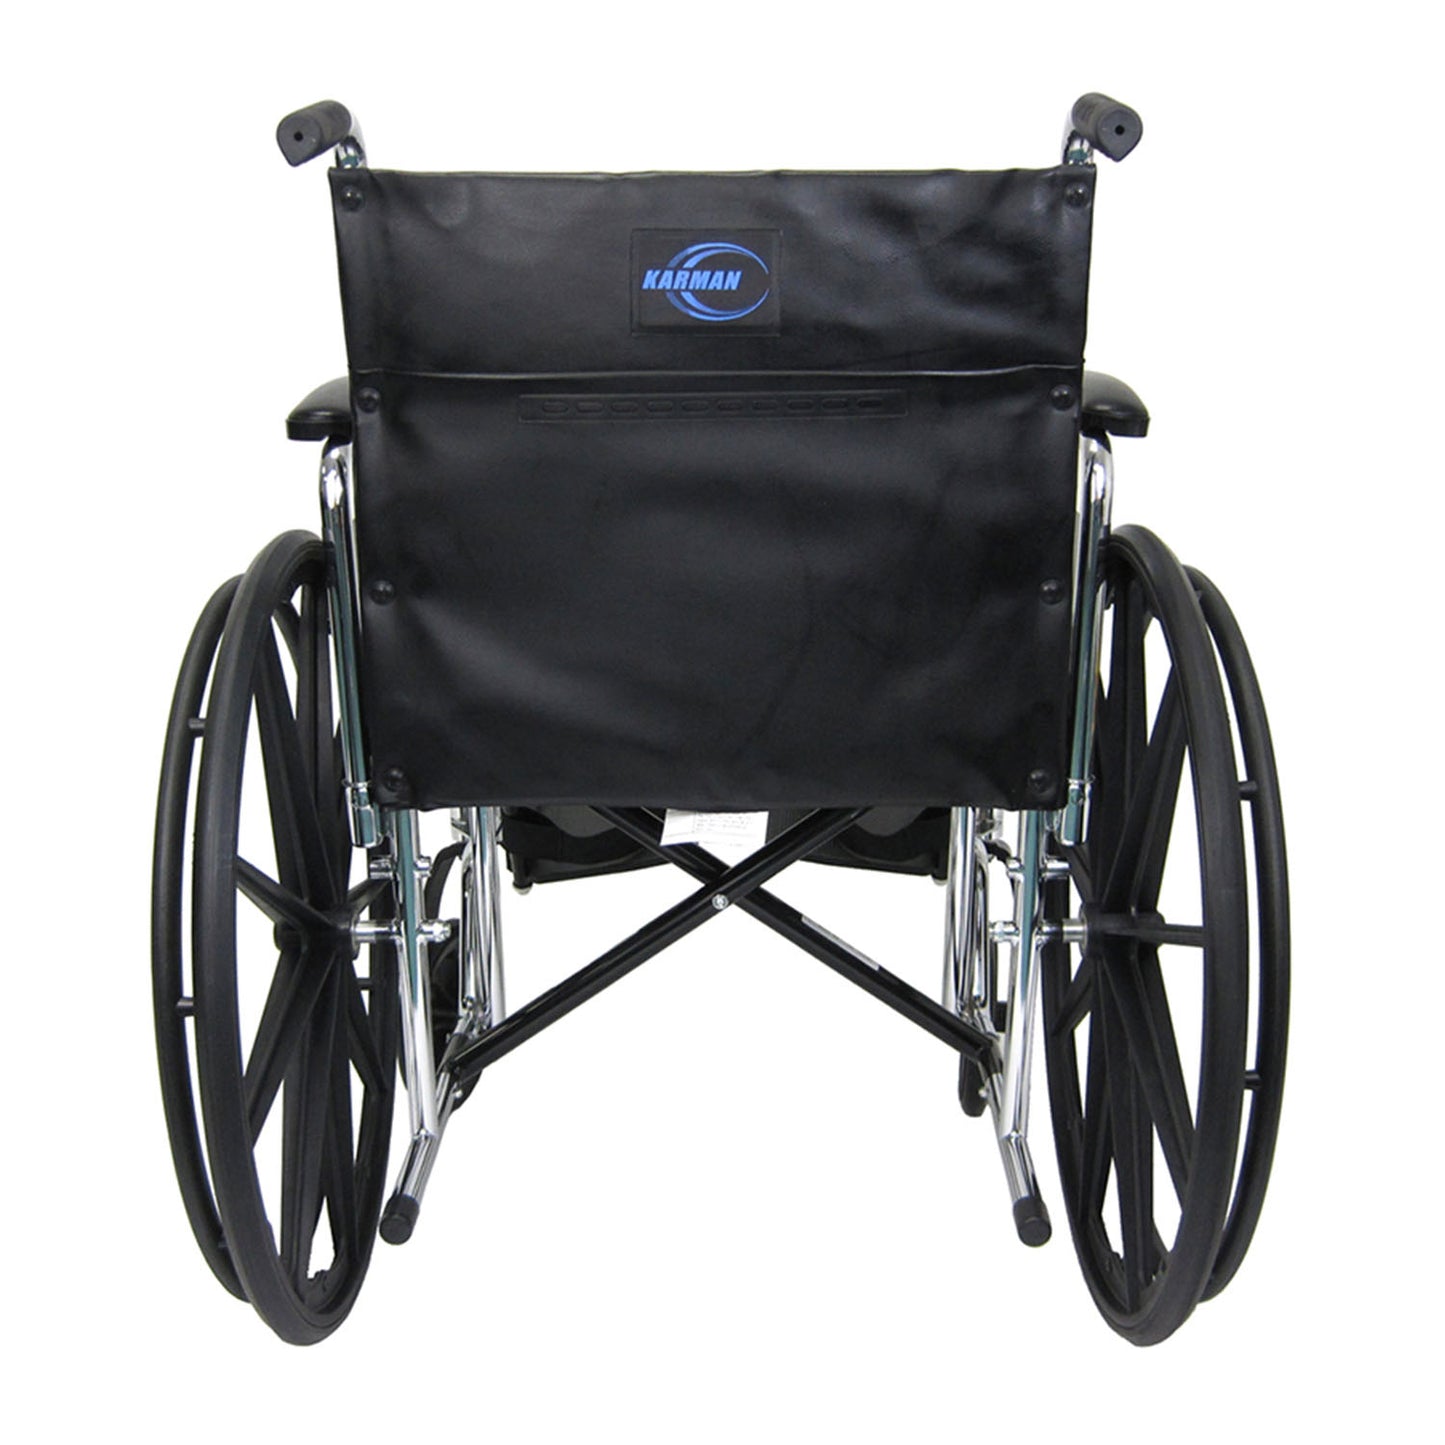 Karman KN-920 20 inch Seat Heavy Duty Wheelchair with Removable Armrest and Adjustable Seat Height